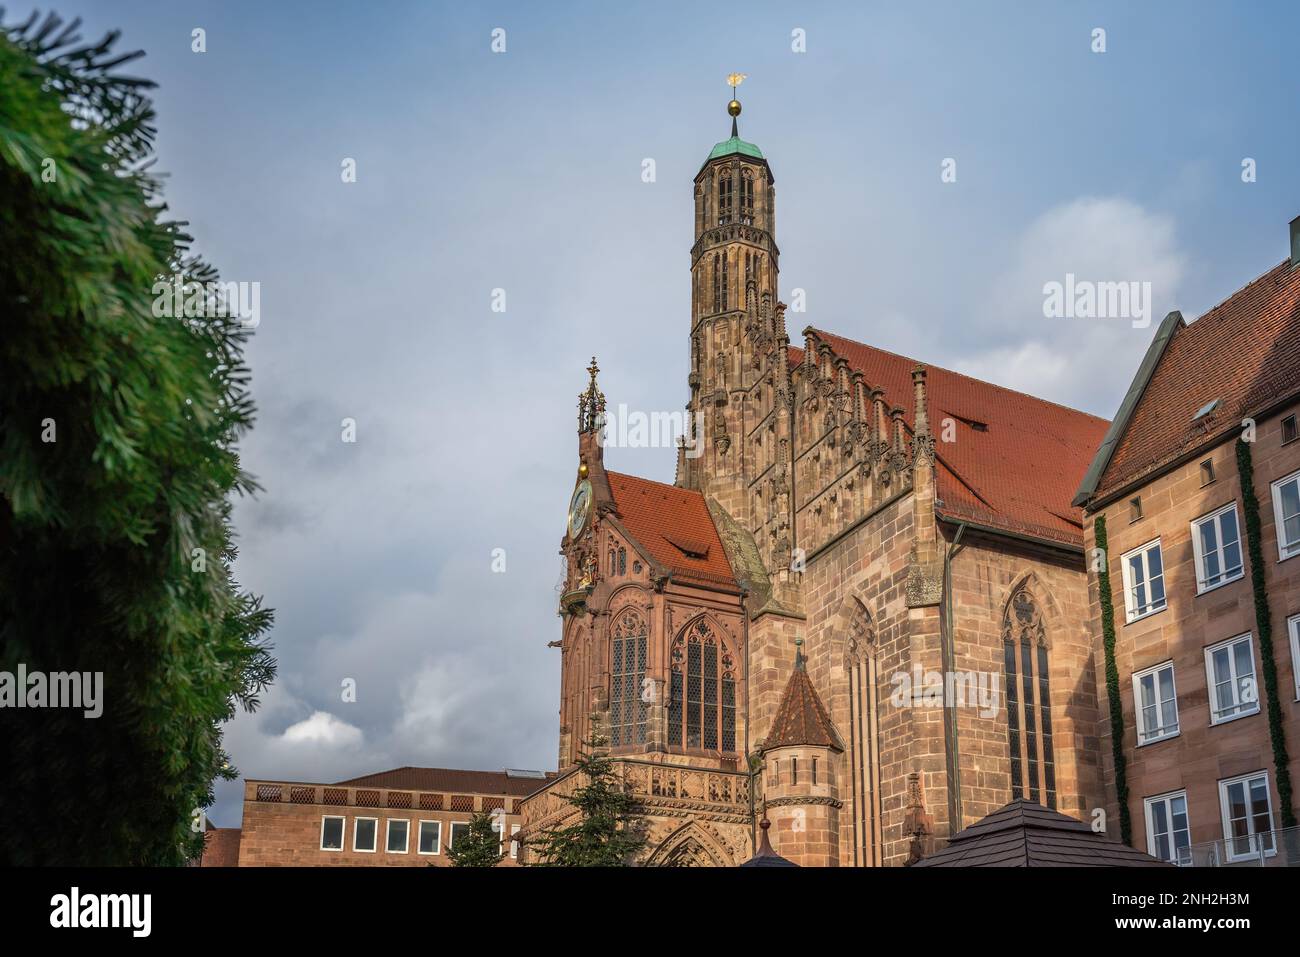 Frauenkirche (Church of Our Lady) at Hauptmarkt Square - Nuremberg, Bavaria, Germany Stock Photo